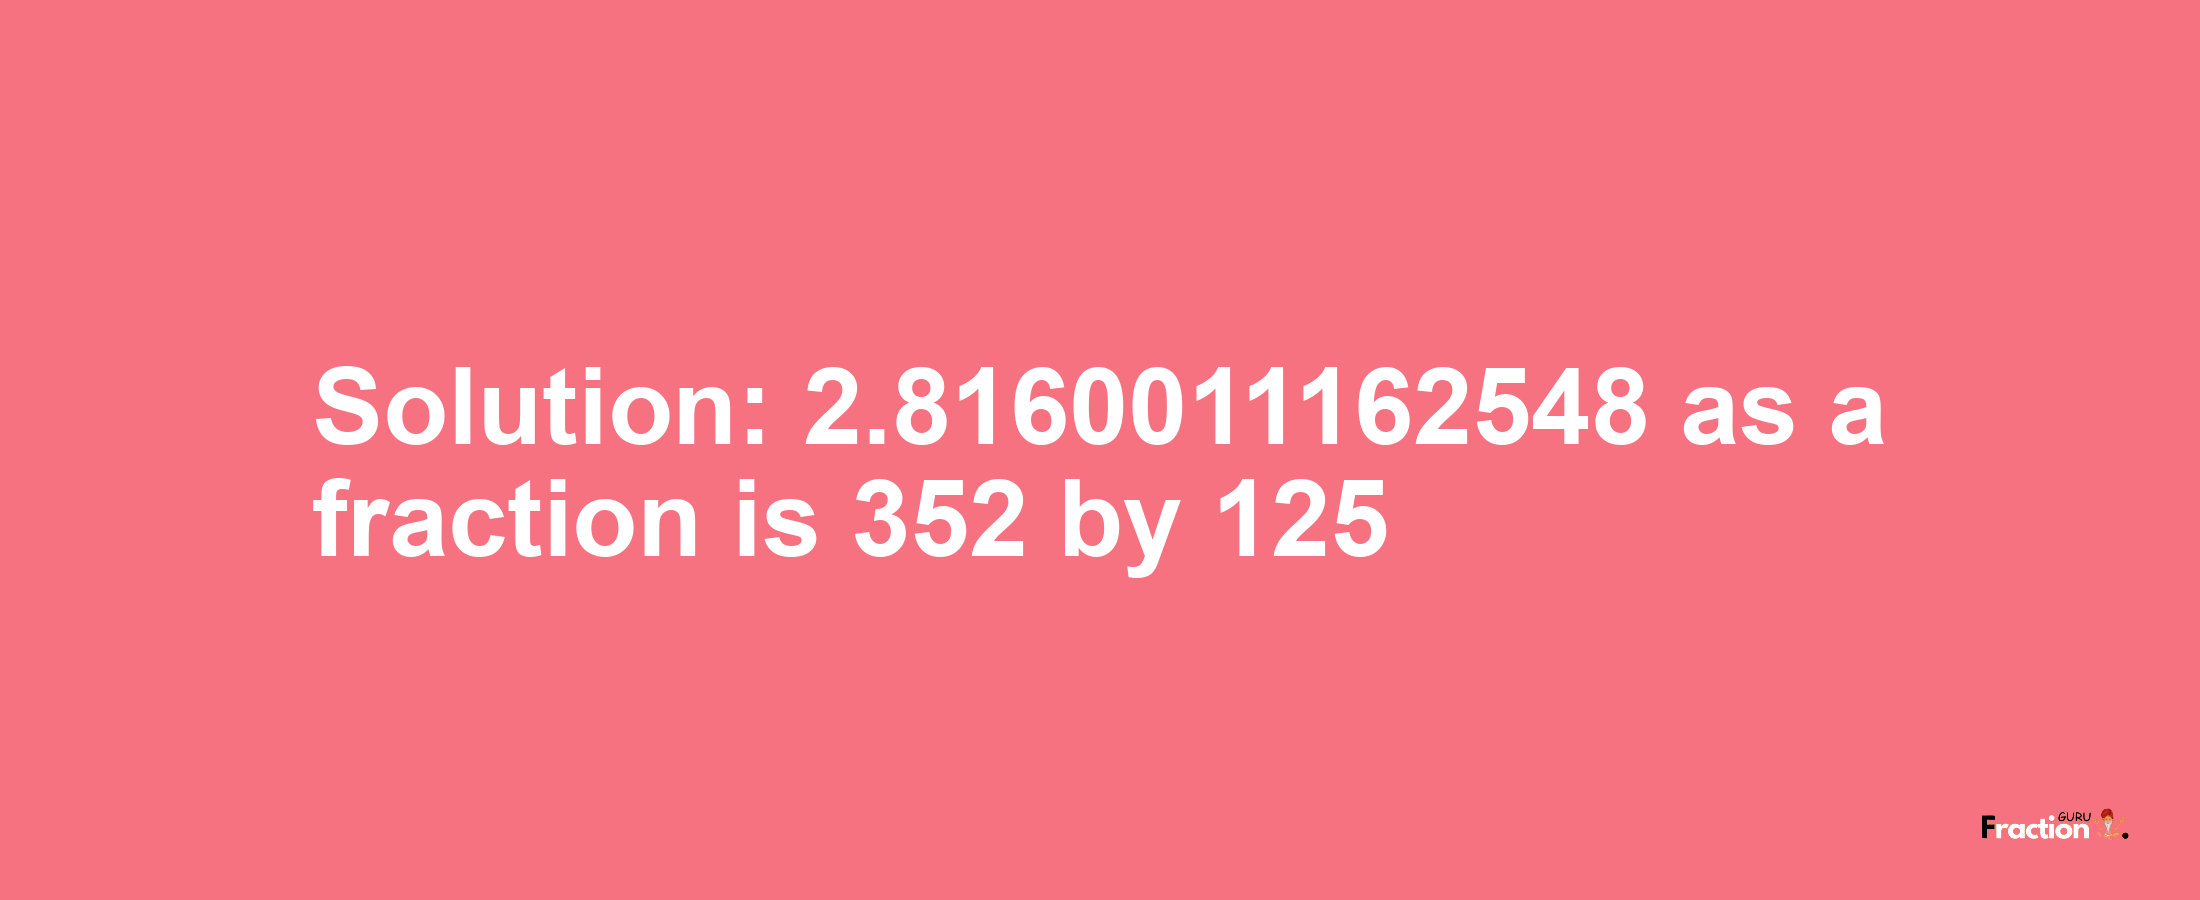 Solution:2.8160011162548 as a fraction is 352/125